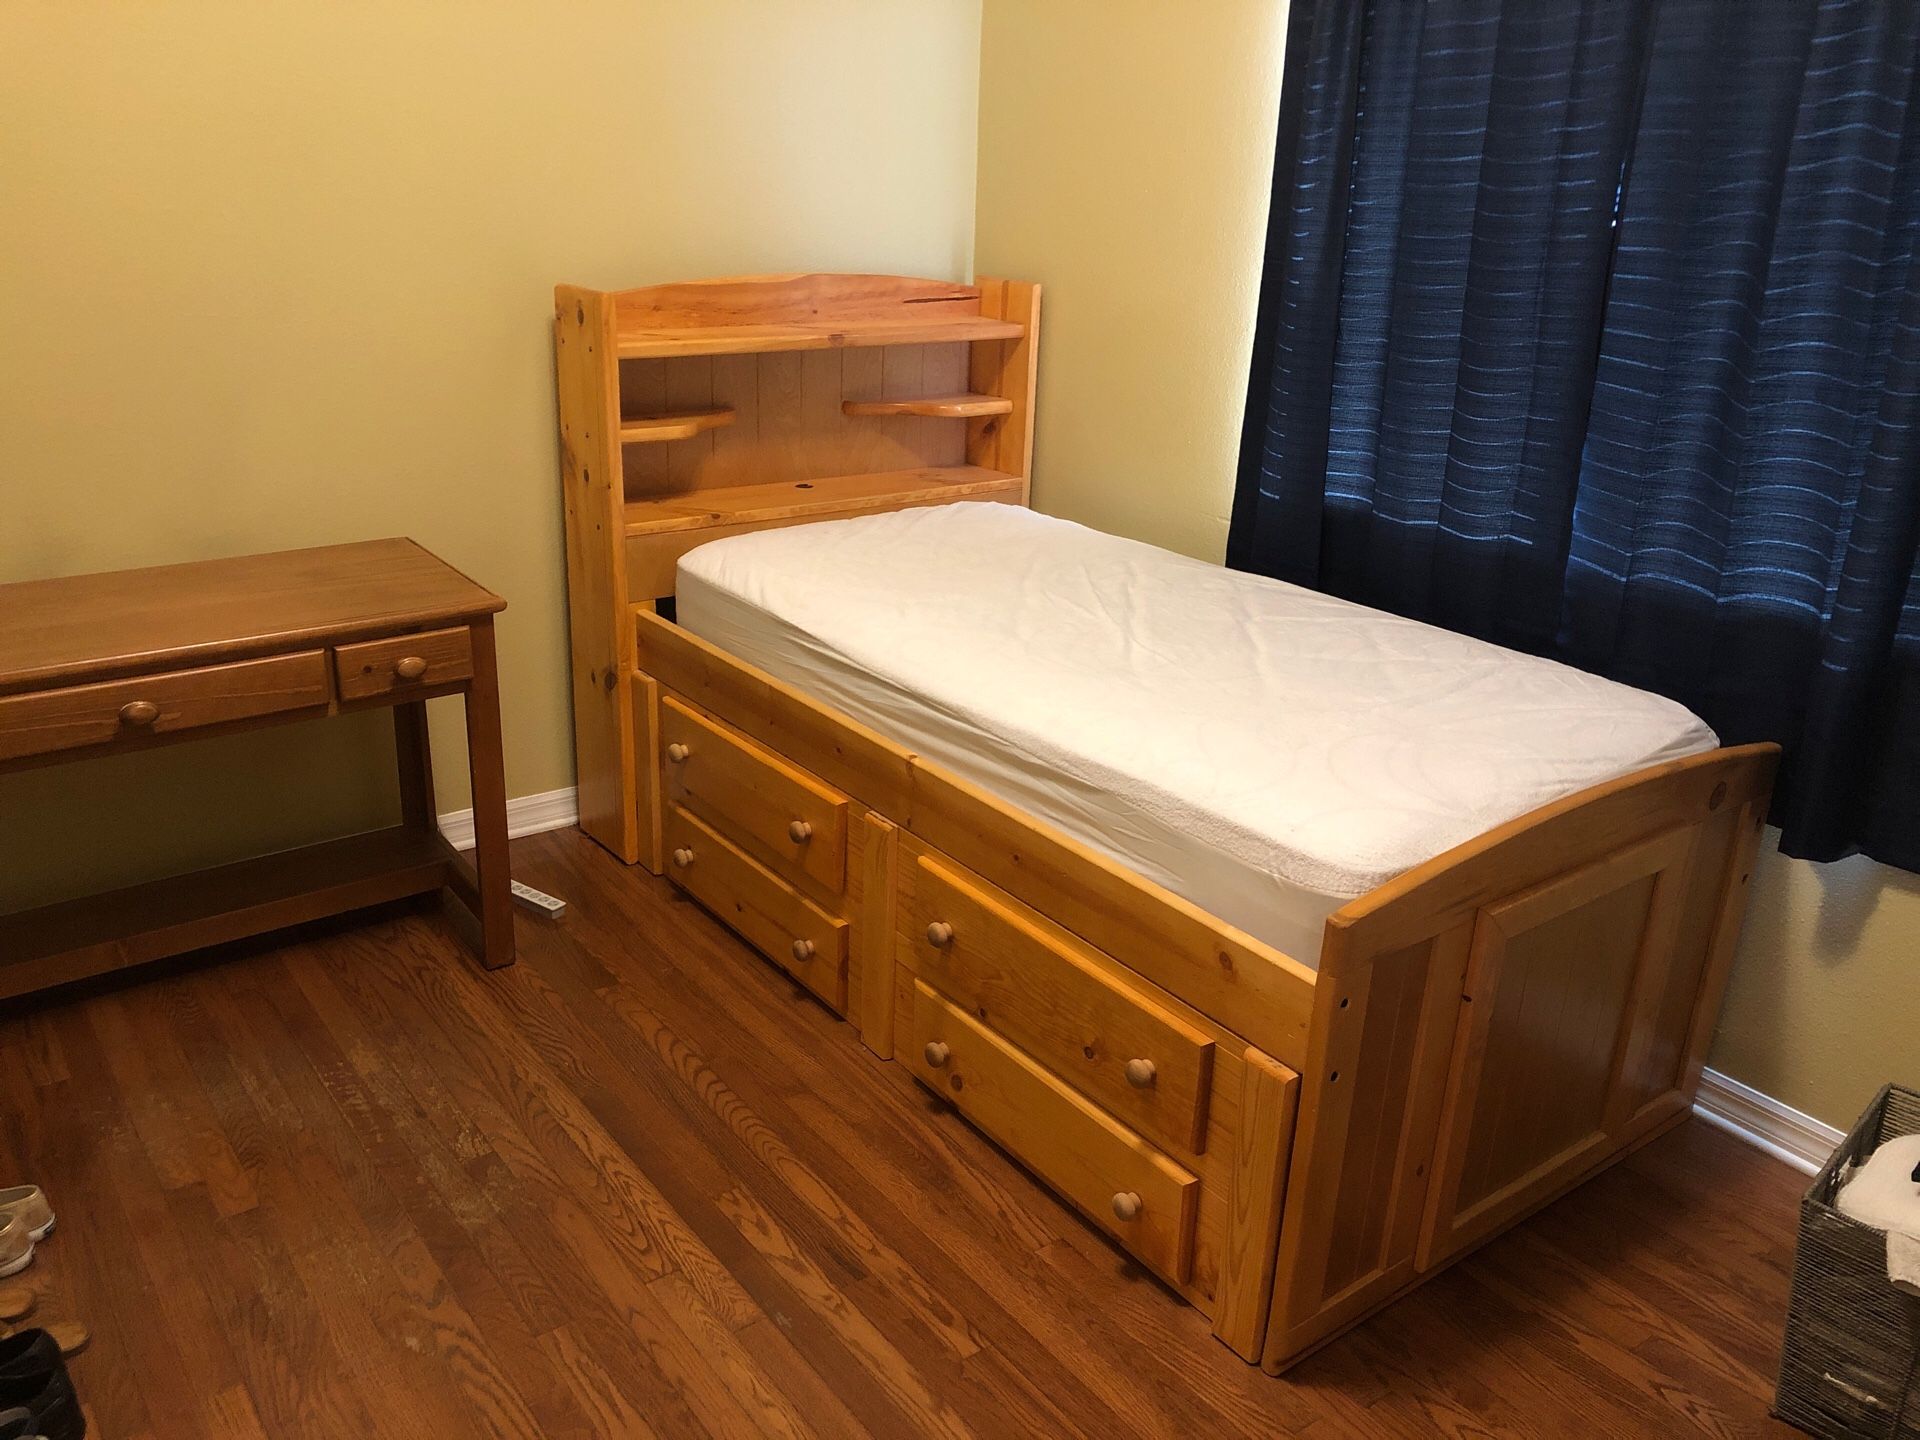 Twin bed which mattress